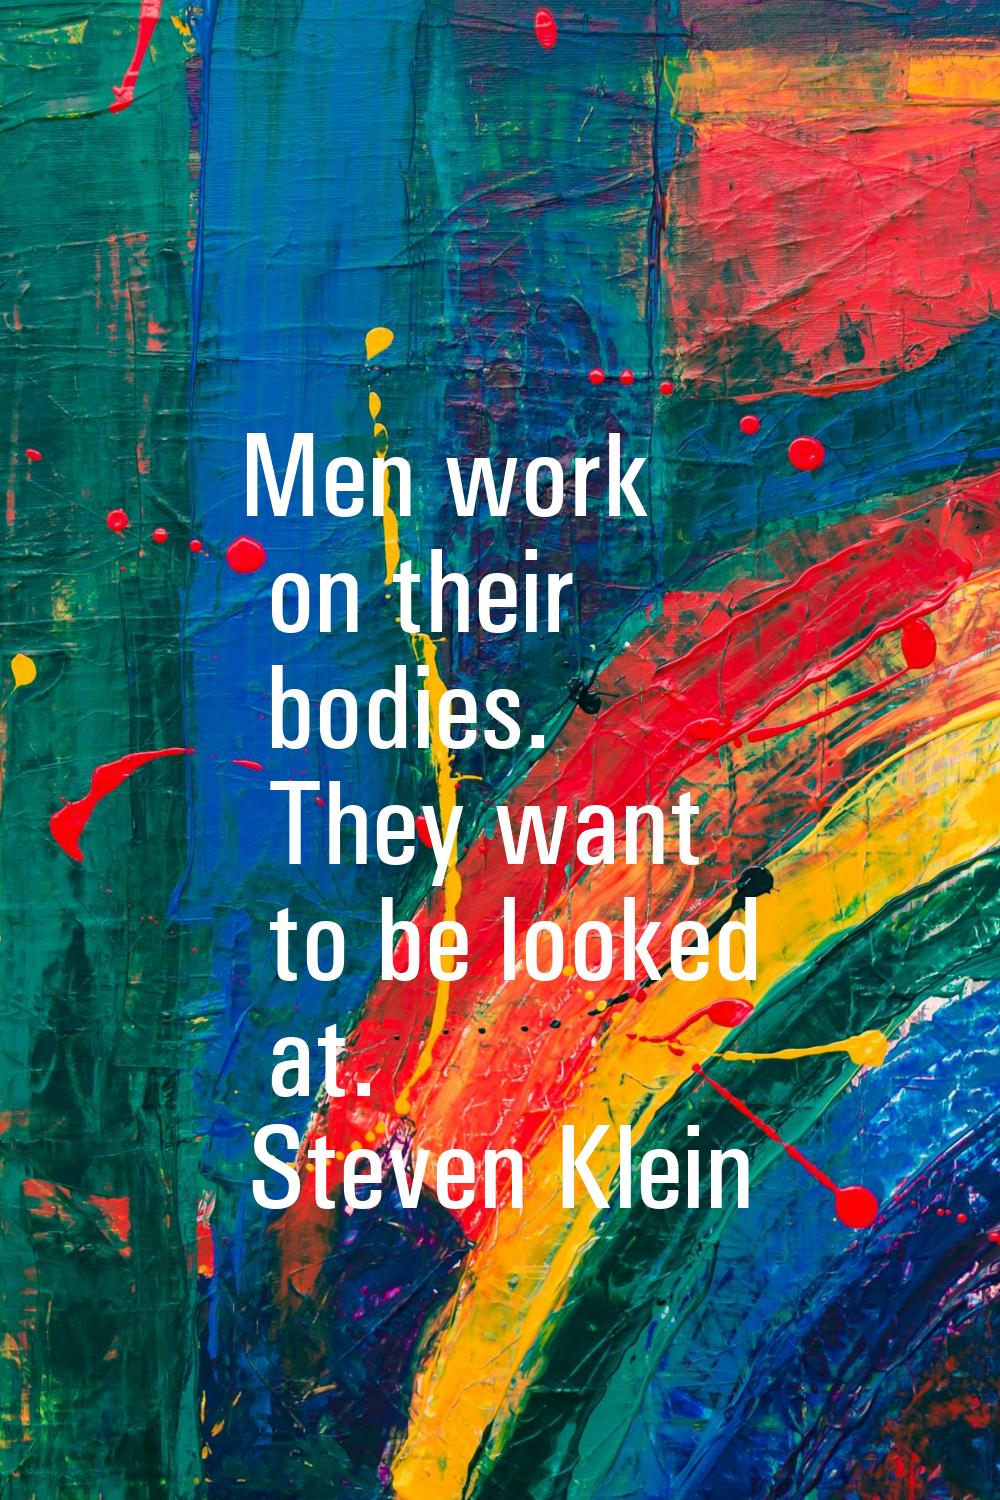 Men work on their bodies. They want to be looked at.